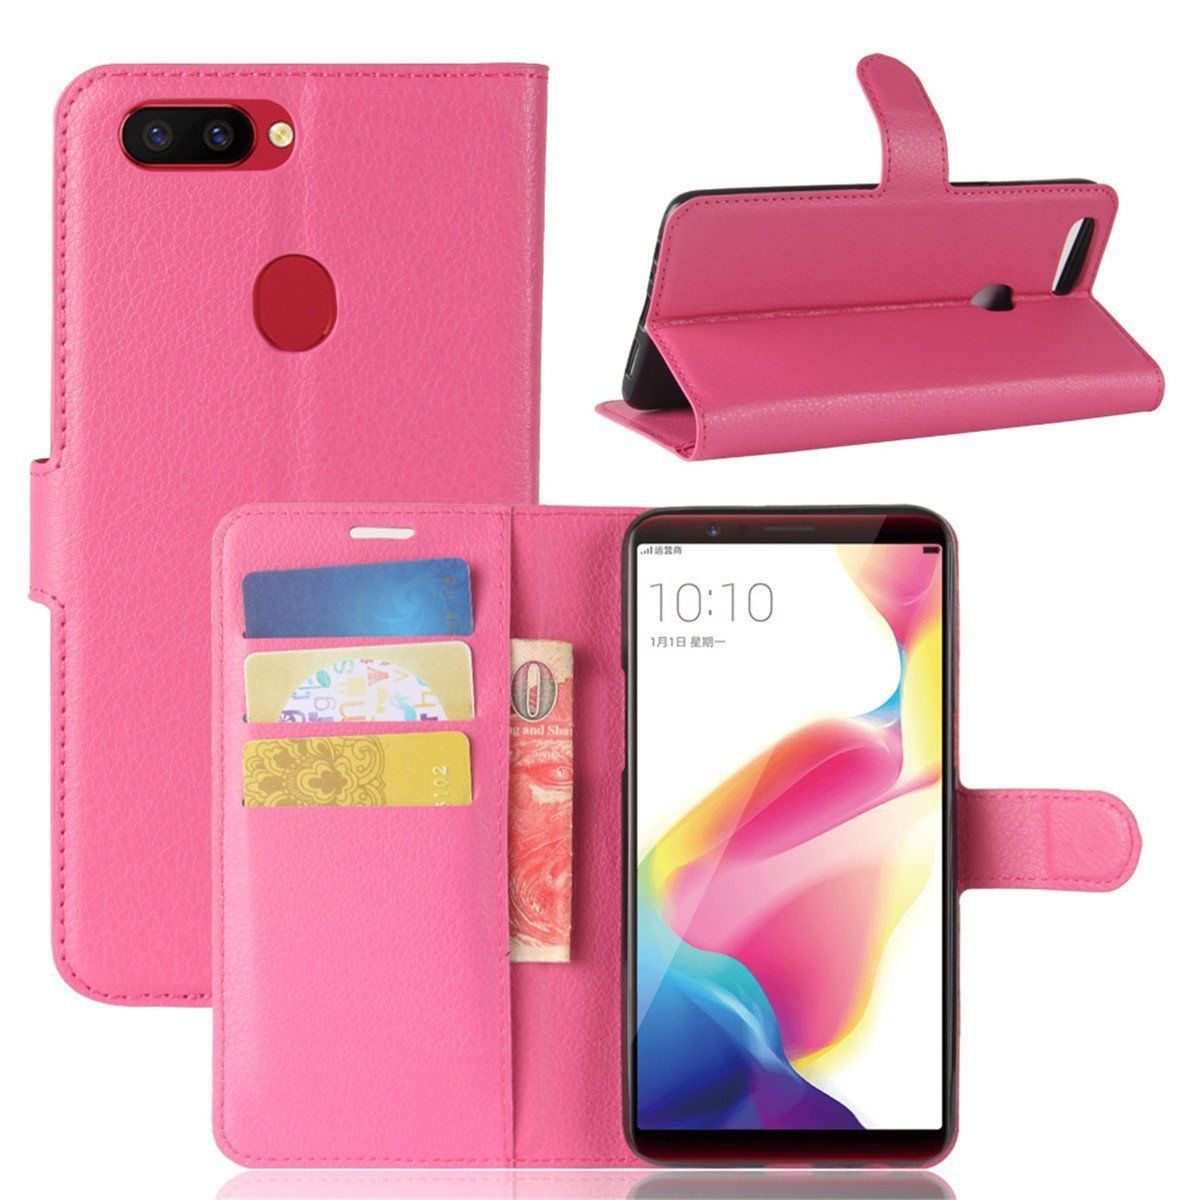 Oppo AX5 Premium Leather Wallet Case Cover For Oppo Case-Hot Pink